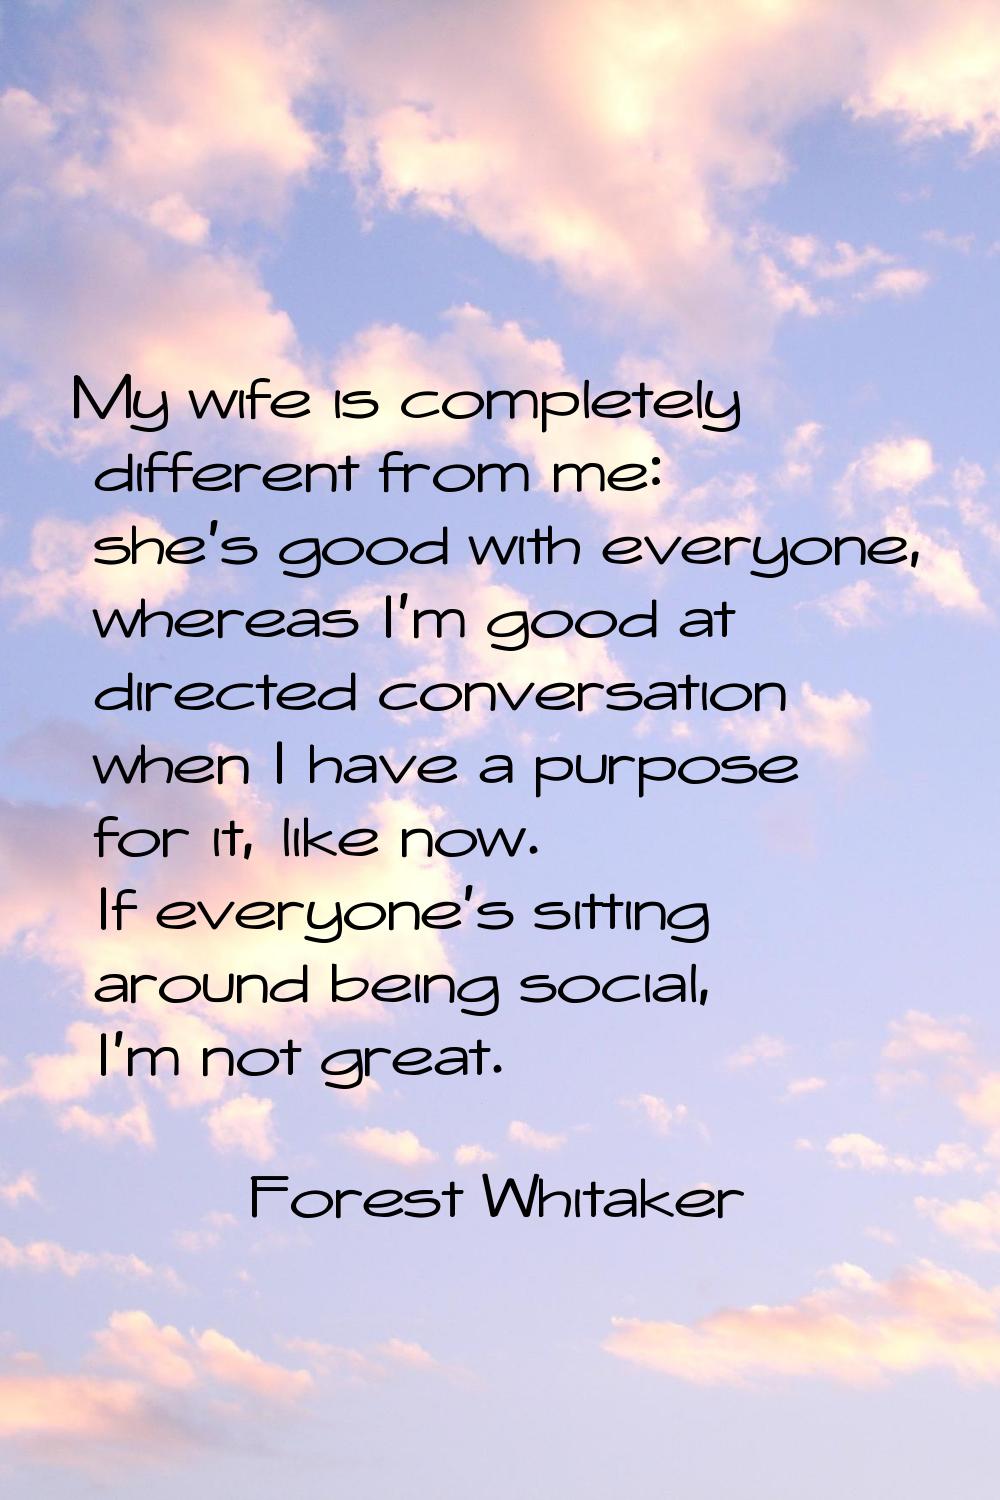 My wife is completely different from me: she's good with everyone, whereas I'm good at directed con